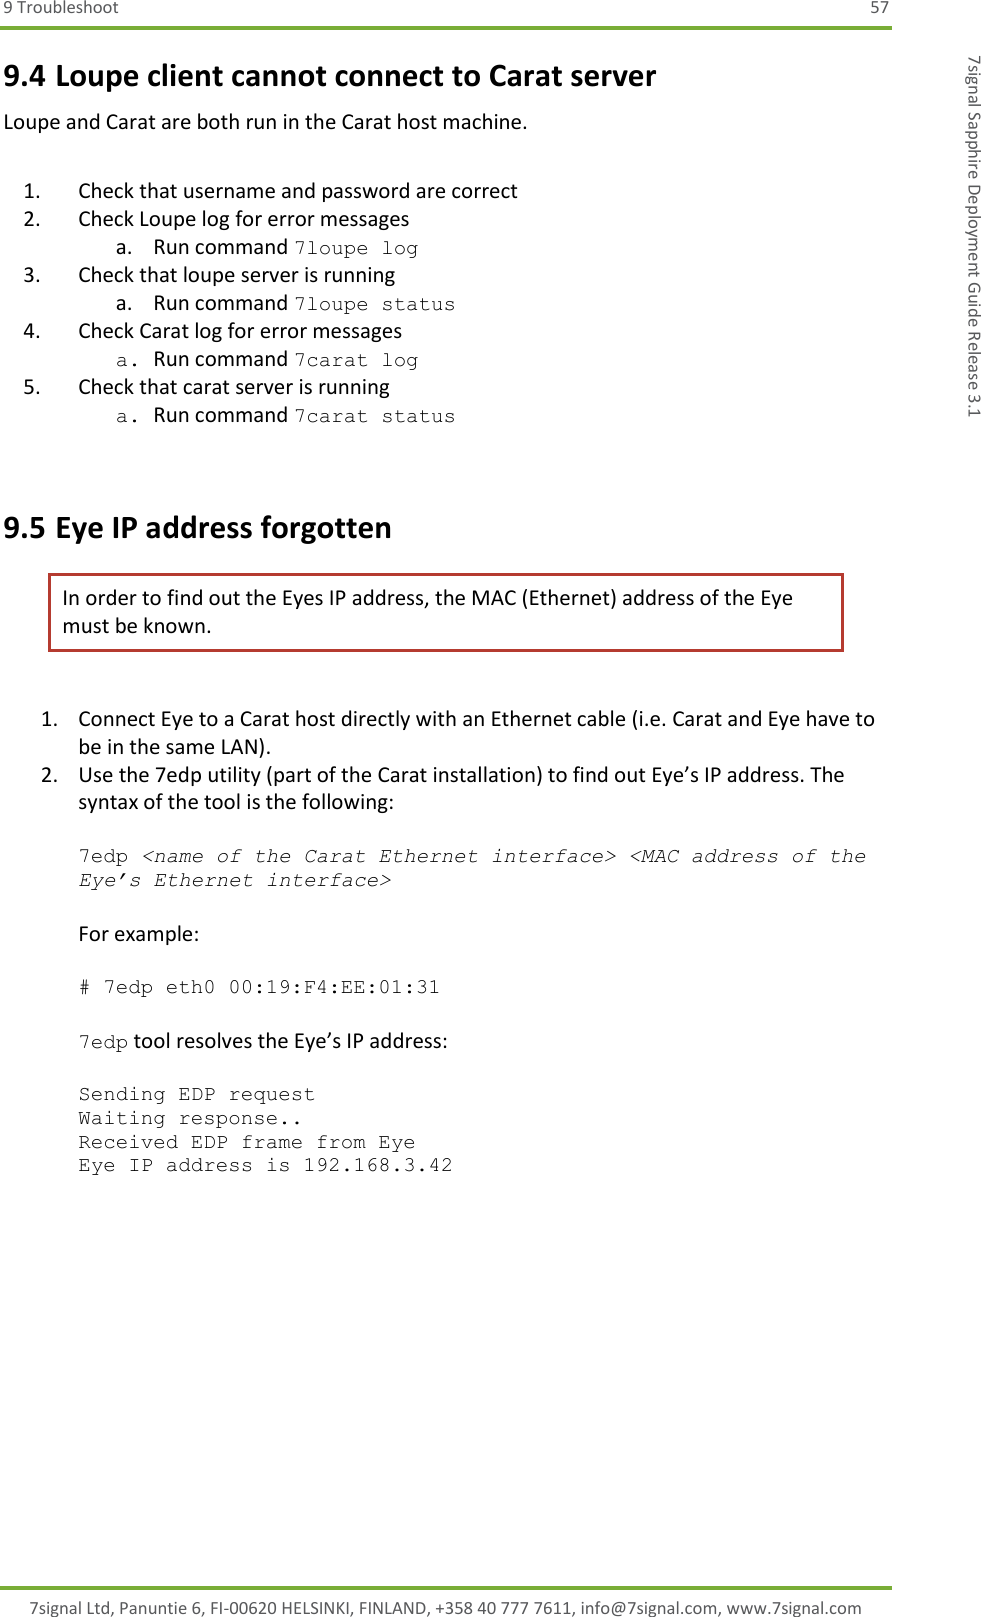 9 Troubleshoot  57 7signal Ltd, Panuntie 6, FI-00620 HELSINKI, FINLAND, +358 40 777 7611, info@7signal.com, www.7signal.com 7signal Sapphire Deployment Guide Release 3.1 9.4 Loupe client cannot connect to Carat server Loupe and Carat are both run in the Carat host machine.  1. Check that username and password are correct 2. Check Loupe log for error messages a. Run command 7loupe log 3. Check that loupe server is running a. Run command 7loupe status 4. Check Carat log for error messages a. Run command 7carat log 5. Check that carat server is running a. Run command 7carat status   9.5 Eye IP address forgotten In order to find out the Eyes IP address, the MAC (Ethernet) address of the Eye must be known.  1. Connect Eye to a Carat host directly with an Ethernet cable (i.e. Carat and Eye have to be in the same LAN). 2. Use the 7edp utility (part of the Carat installation) to find out Eye’s IP address. The syntax of the tool is the following:  7edp &lt;name of the Carat Ethernet interface&gt; &lt;MAC address of the Eye’s Ethernet interface&gt;  For example:  # 7edp eth0 00:19:F4:EE:01:31  7edp tool resolves the Eye’s IP address:  Sending EDP request Waiting response.. Received EDP frame from Eye Eye IP address is 192.168.3.42  